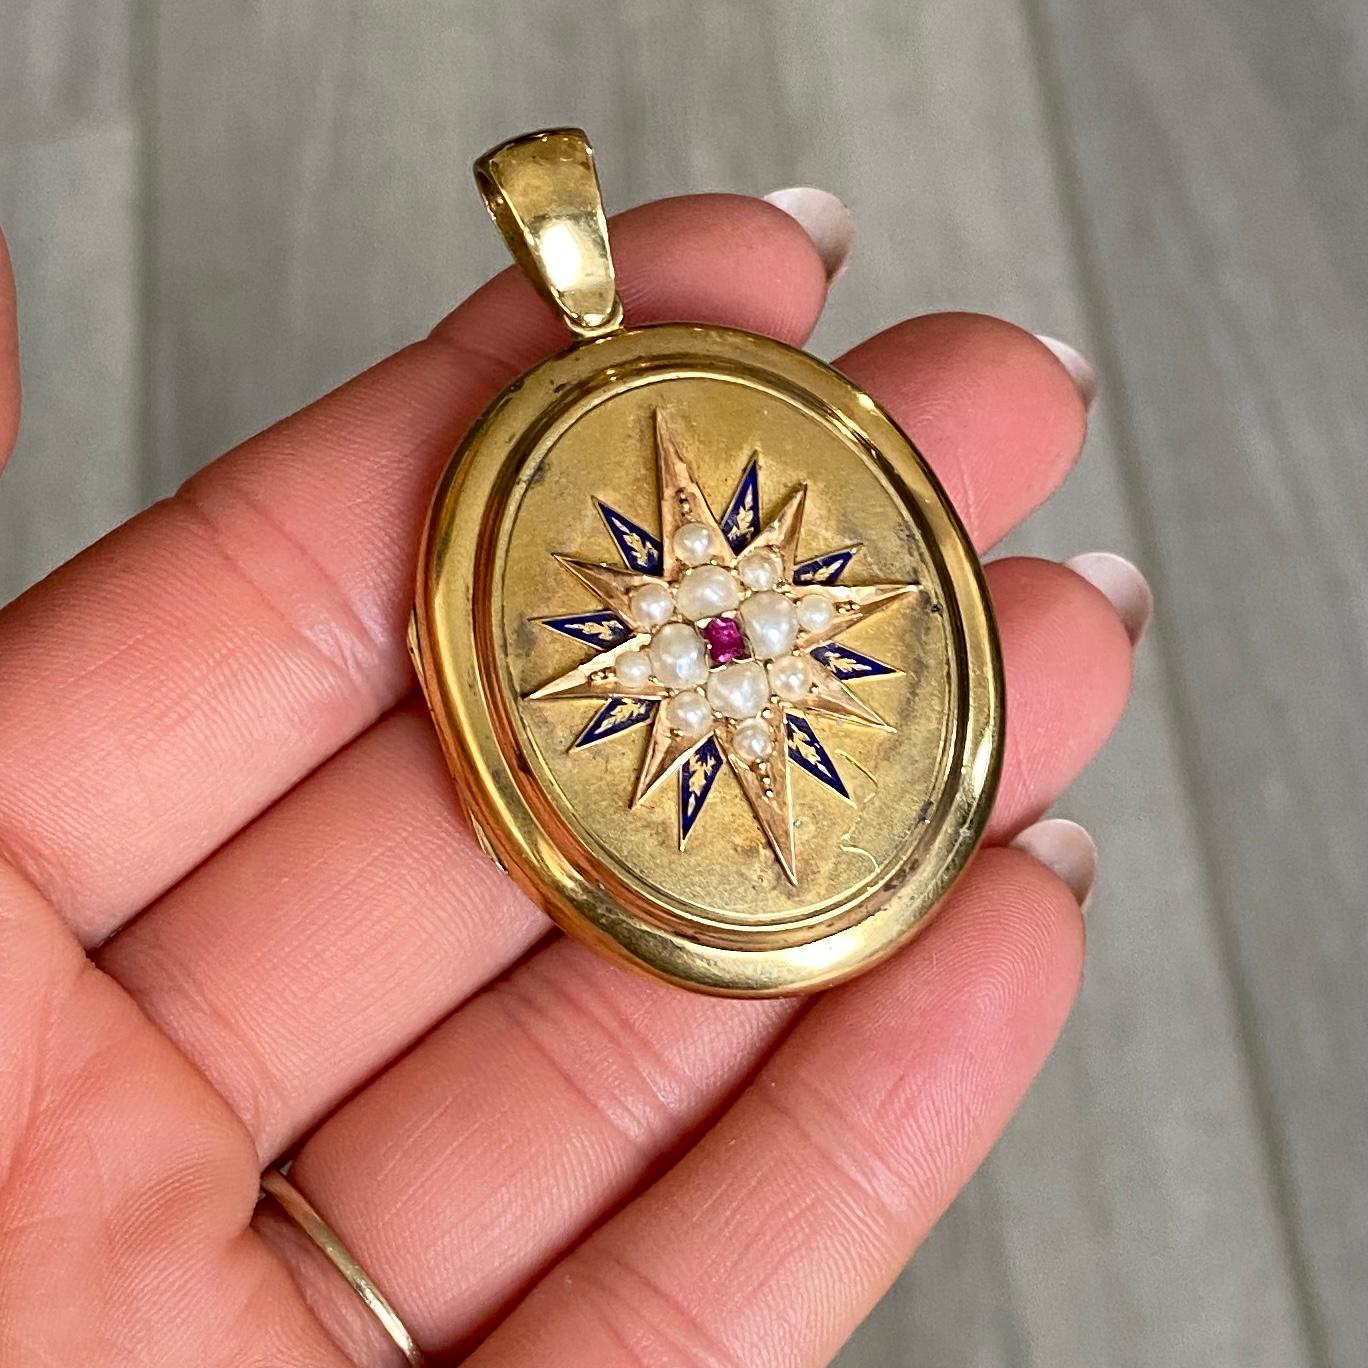 This sweet locket has a raised gold star which is set with seed pearls and has blue enamel detail and a ruby set at the centre. The back of the locket has a heart motif and a picture still at the centre. 

Locket Dimensions: 42x32mm

Weight: 18.2g

